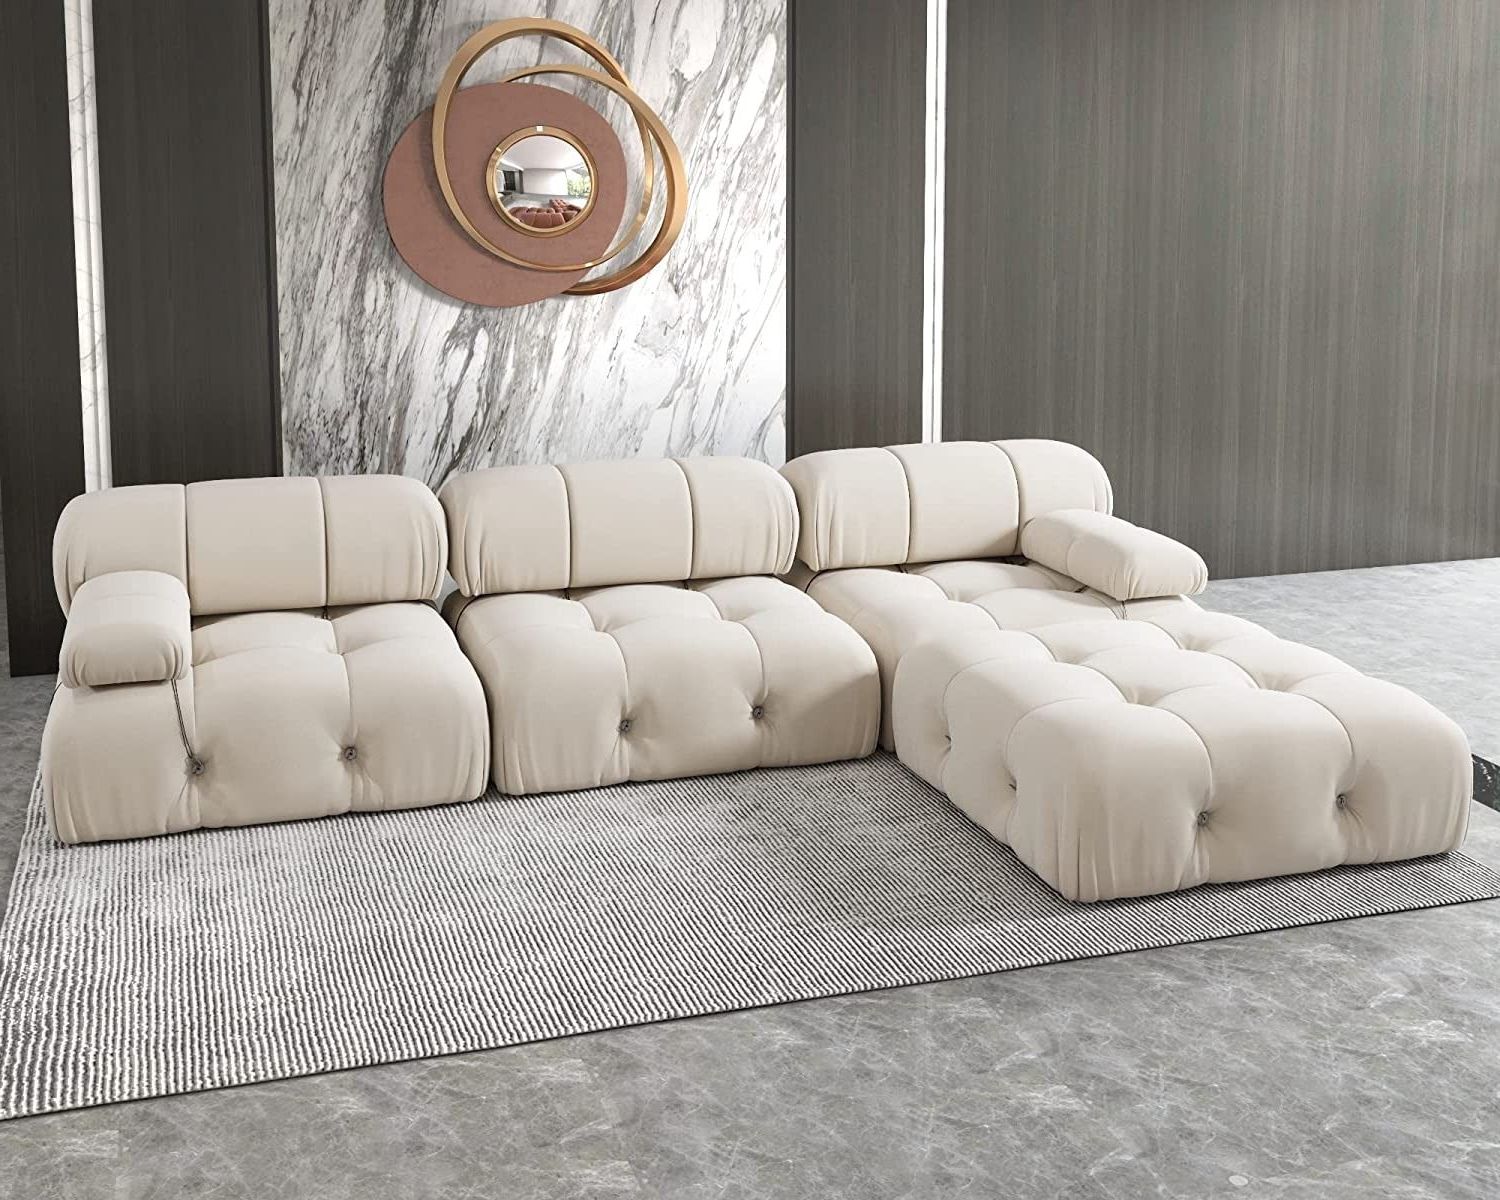 Jach 104" Convertible Modular Sectional Sofa, L Shaped Minimalist Within Most Recently Released 104" Sectional Sofas (View 4 of 15)